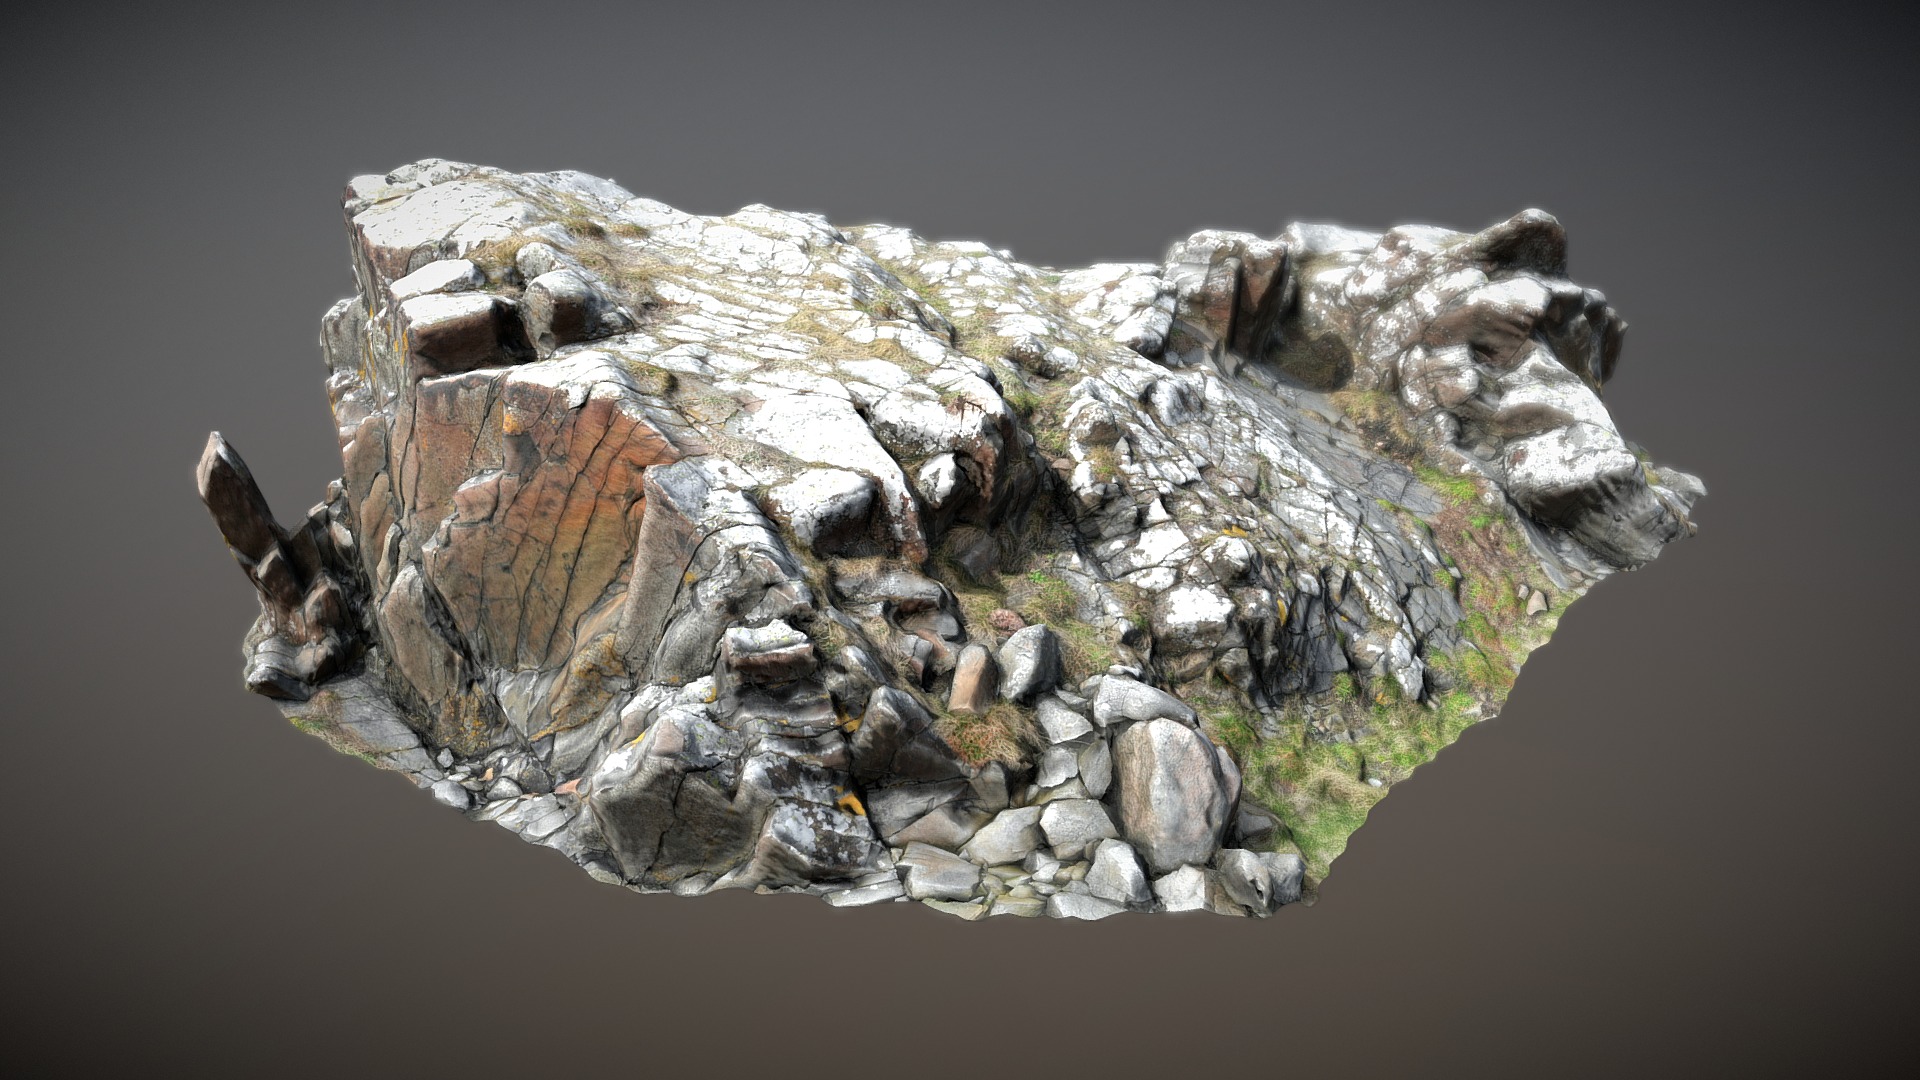 3D model Nature Rock Cliff K2 - This is a 3D model of the Nature Rock Cliff K2. The 3D model is about a large pile of rocks.